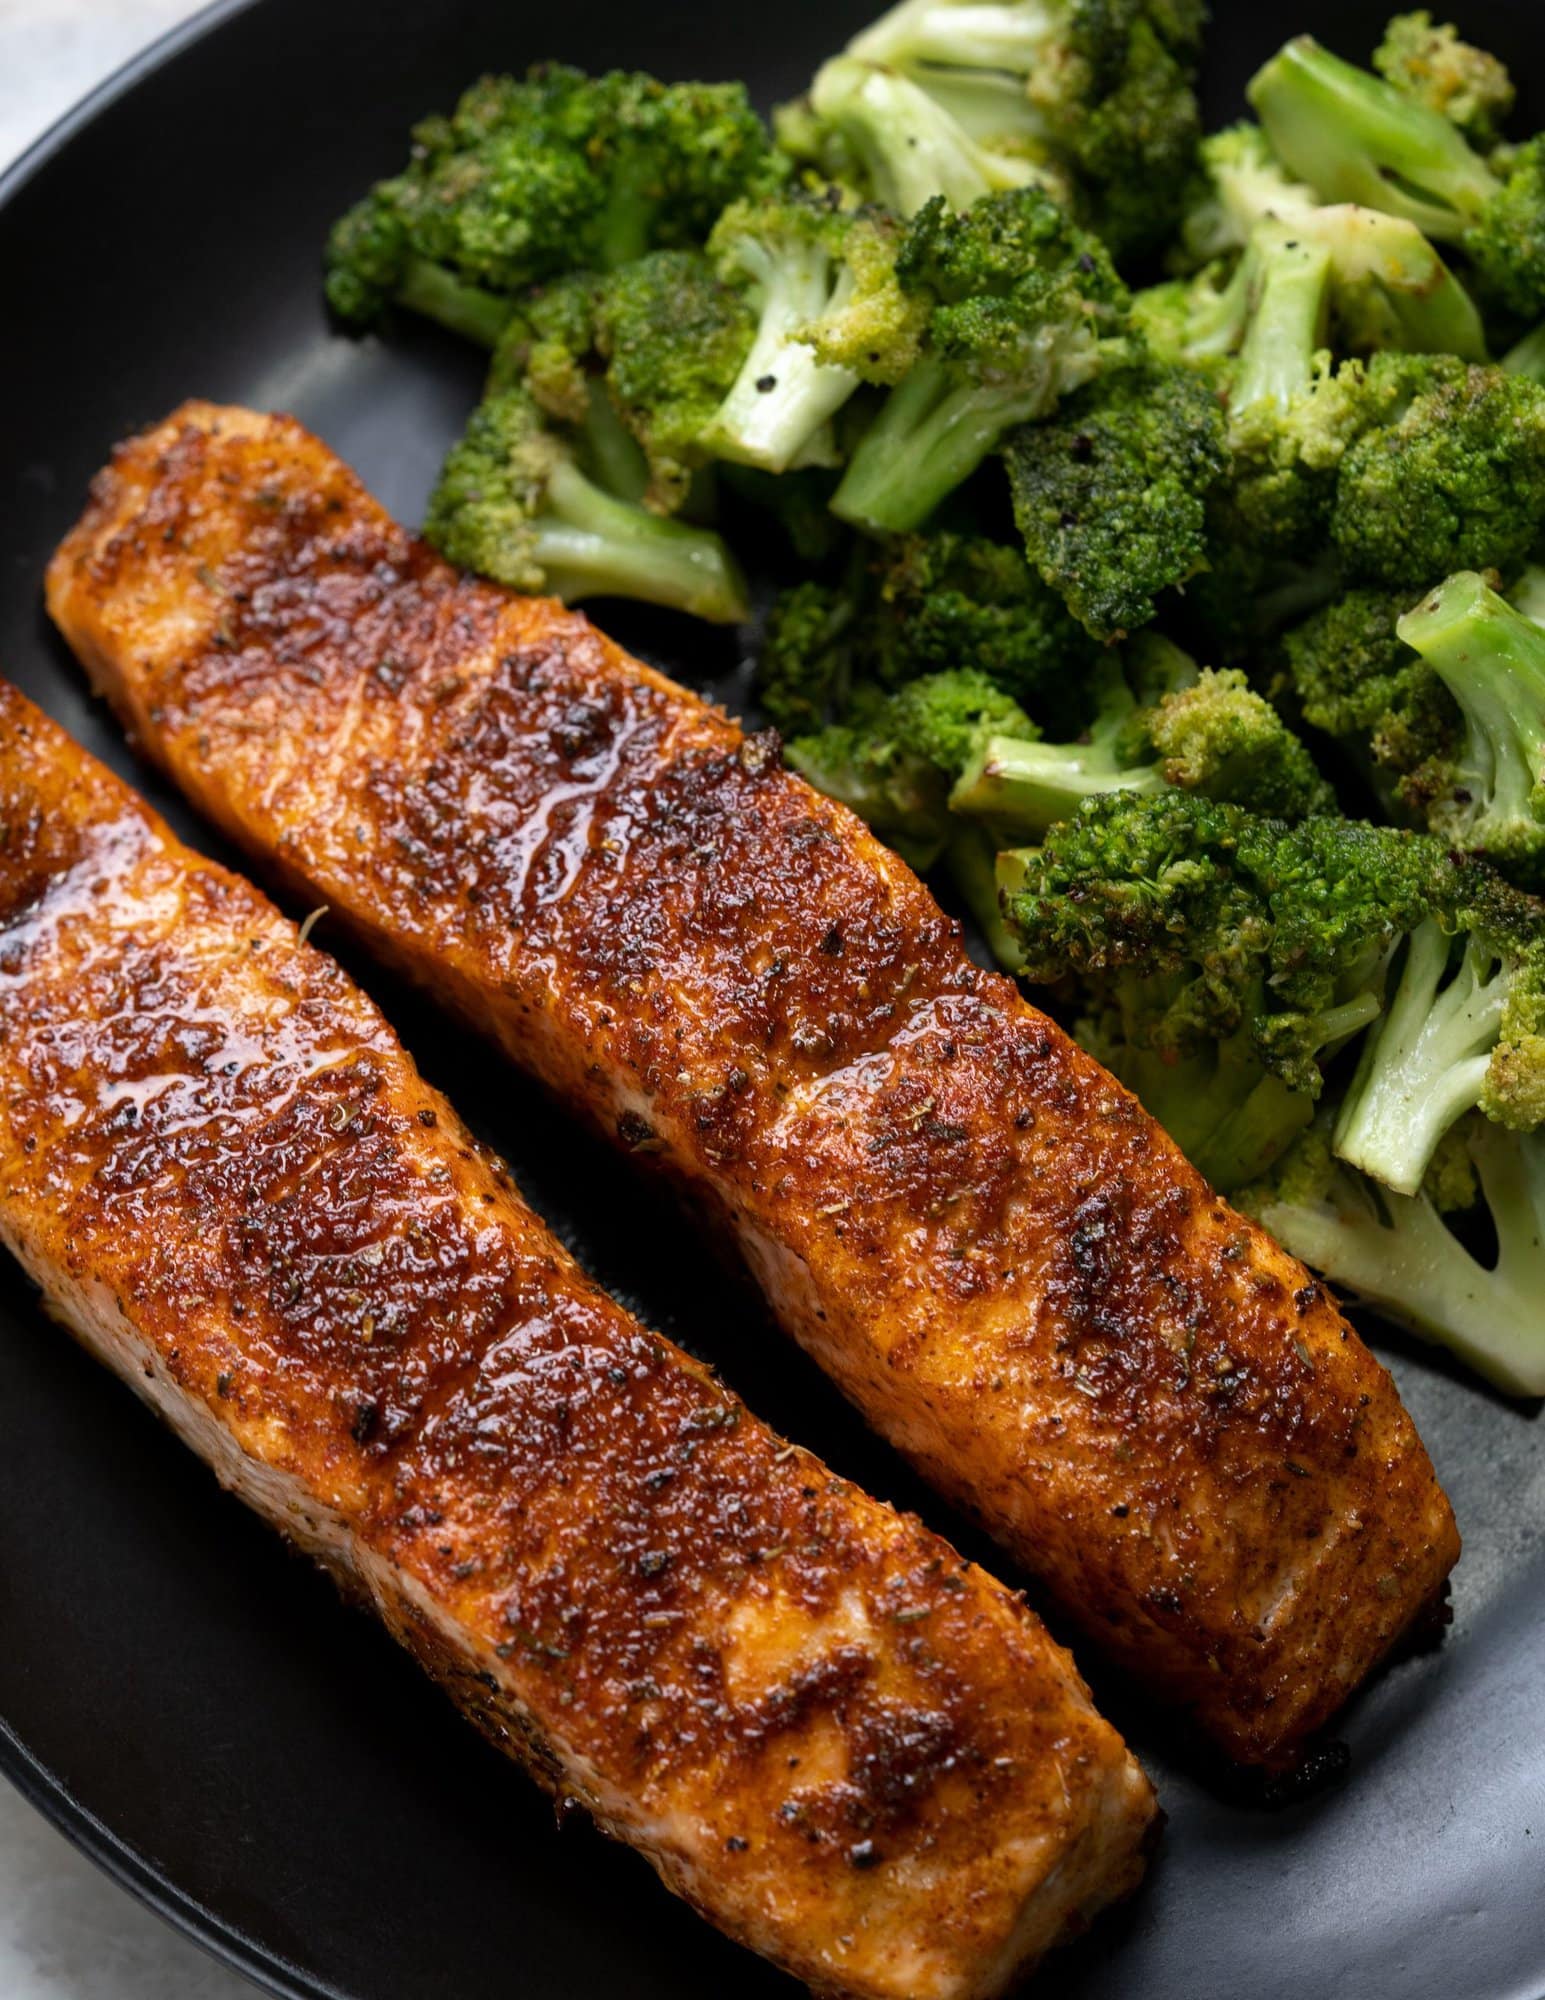 Air fried salmon served with roasted broccoli on a black plate.